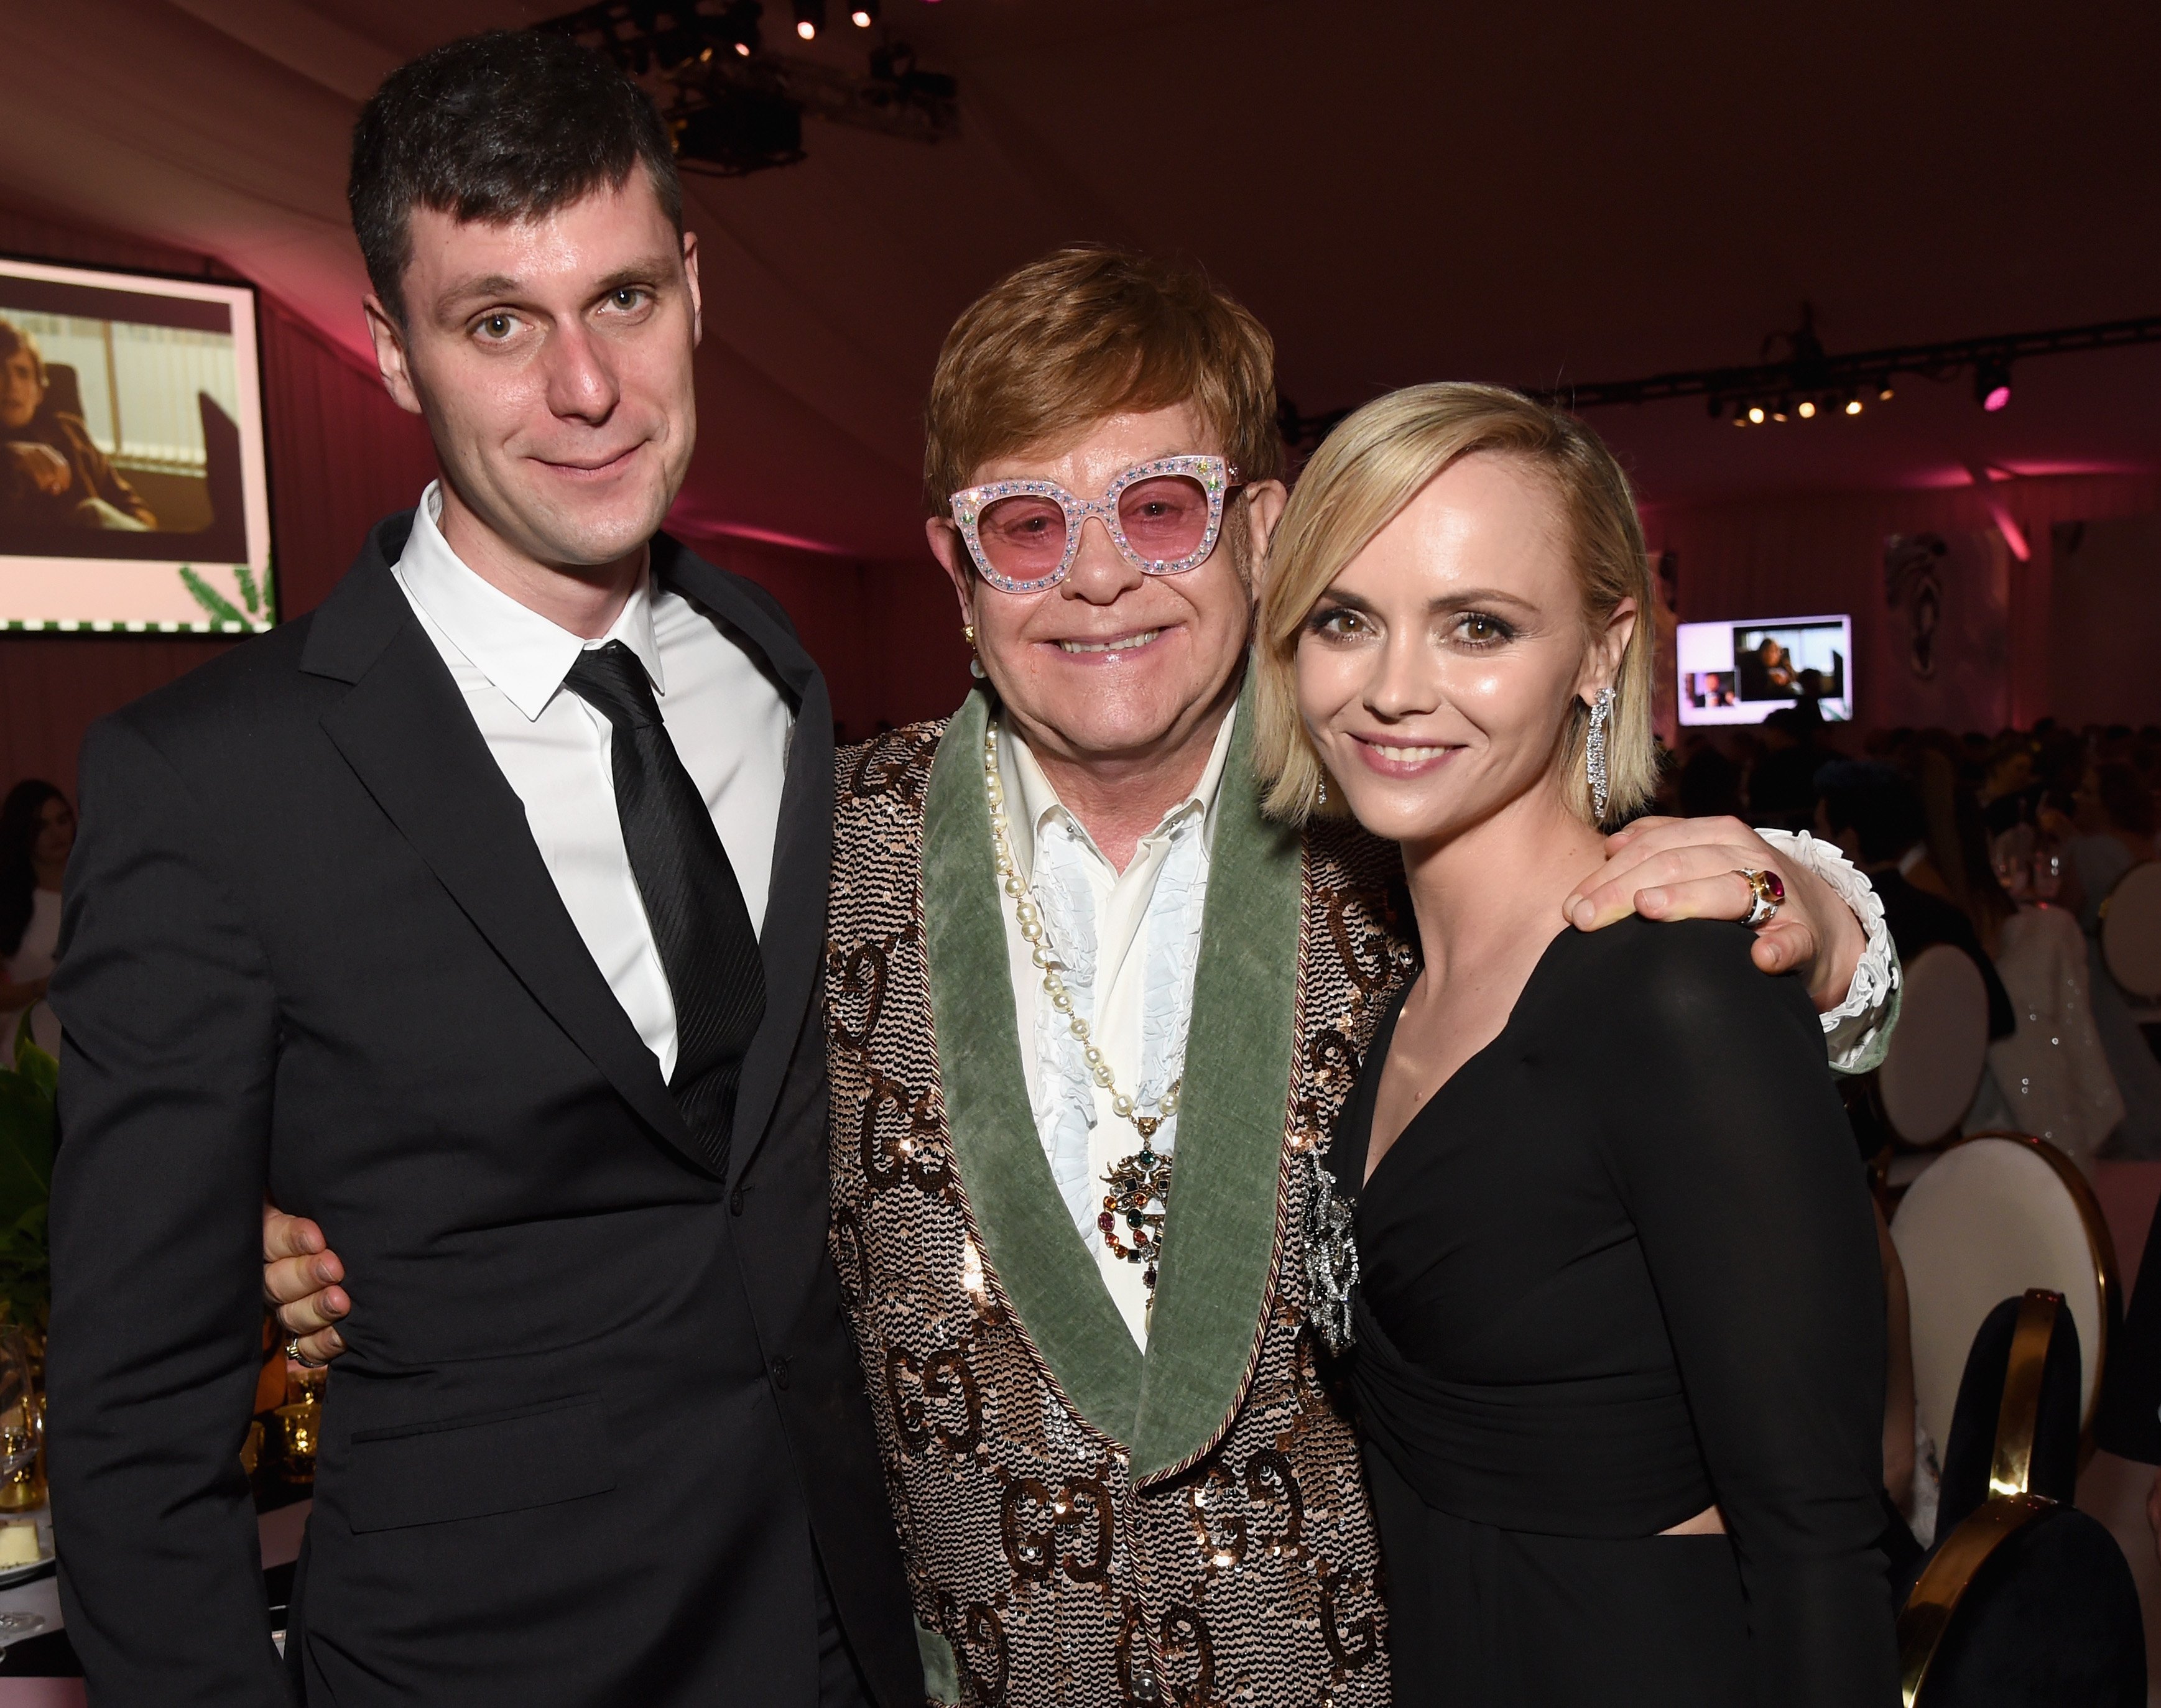 James Heerdegen, Sir Elton John, and Christina Ricci attend the 27th annual Elton John AIDS Foundation Academy Awards Viewing Party sponsored by IMDb and Neuro Drinks celebrating EJAF and the 91st Academy Awards on February 24, 2019, in West Hollywood, California. | Source: Getty Images